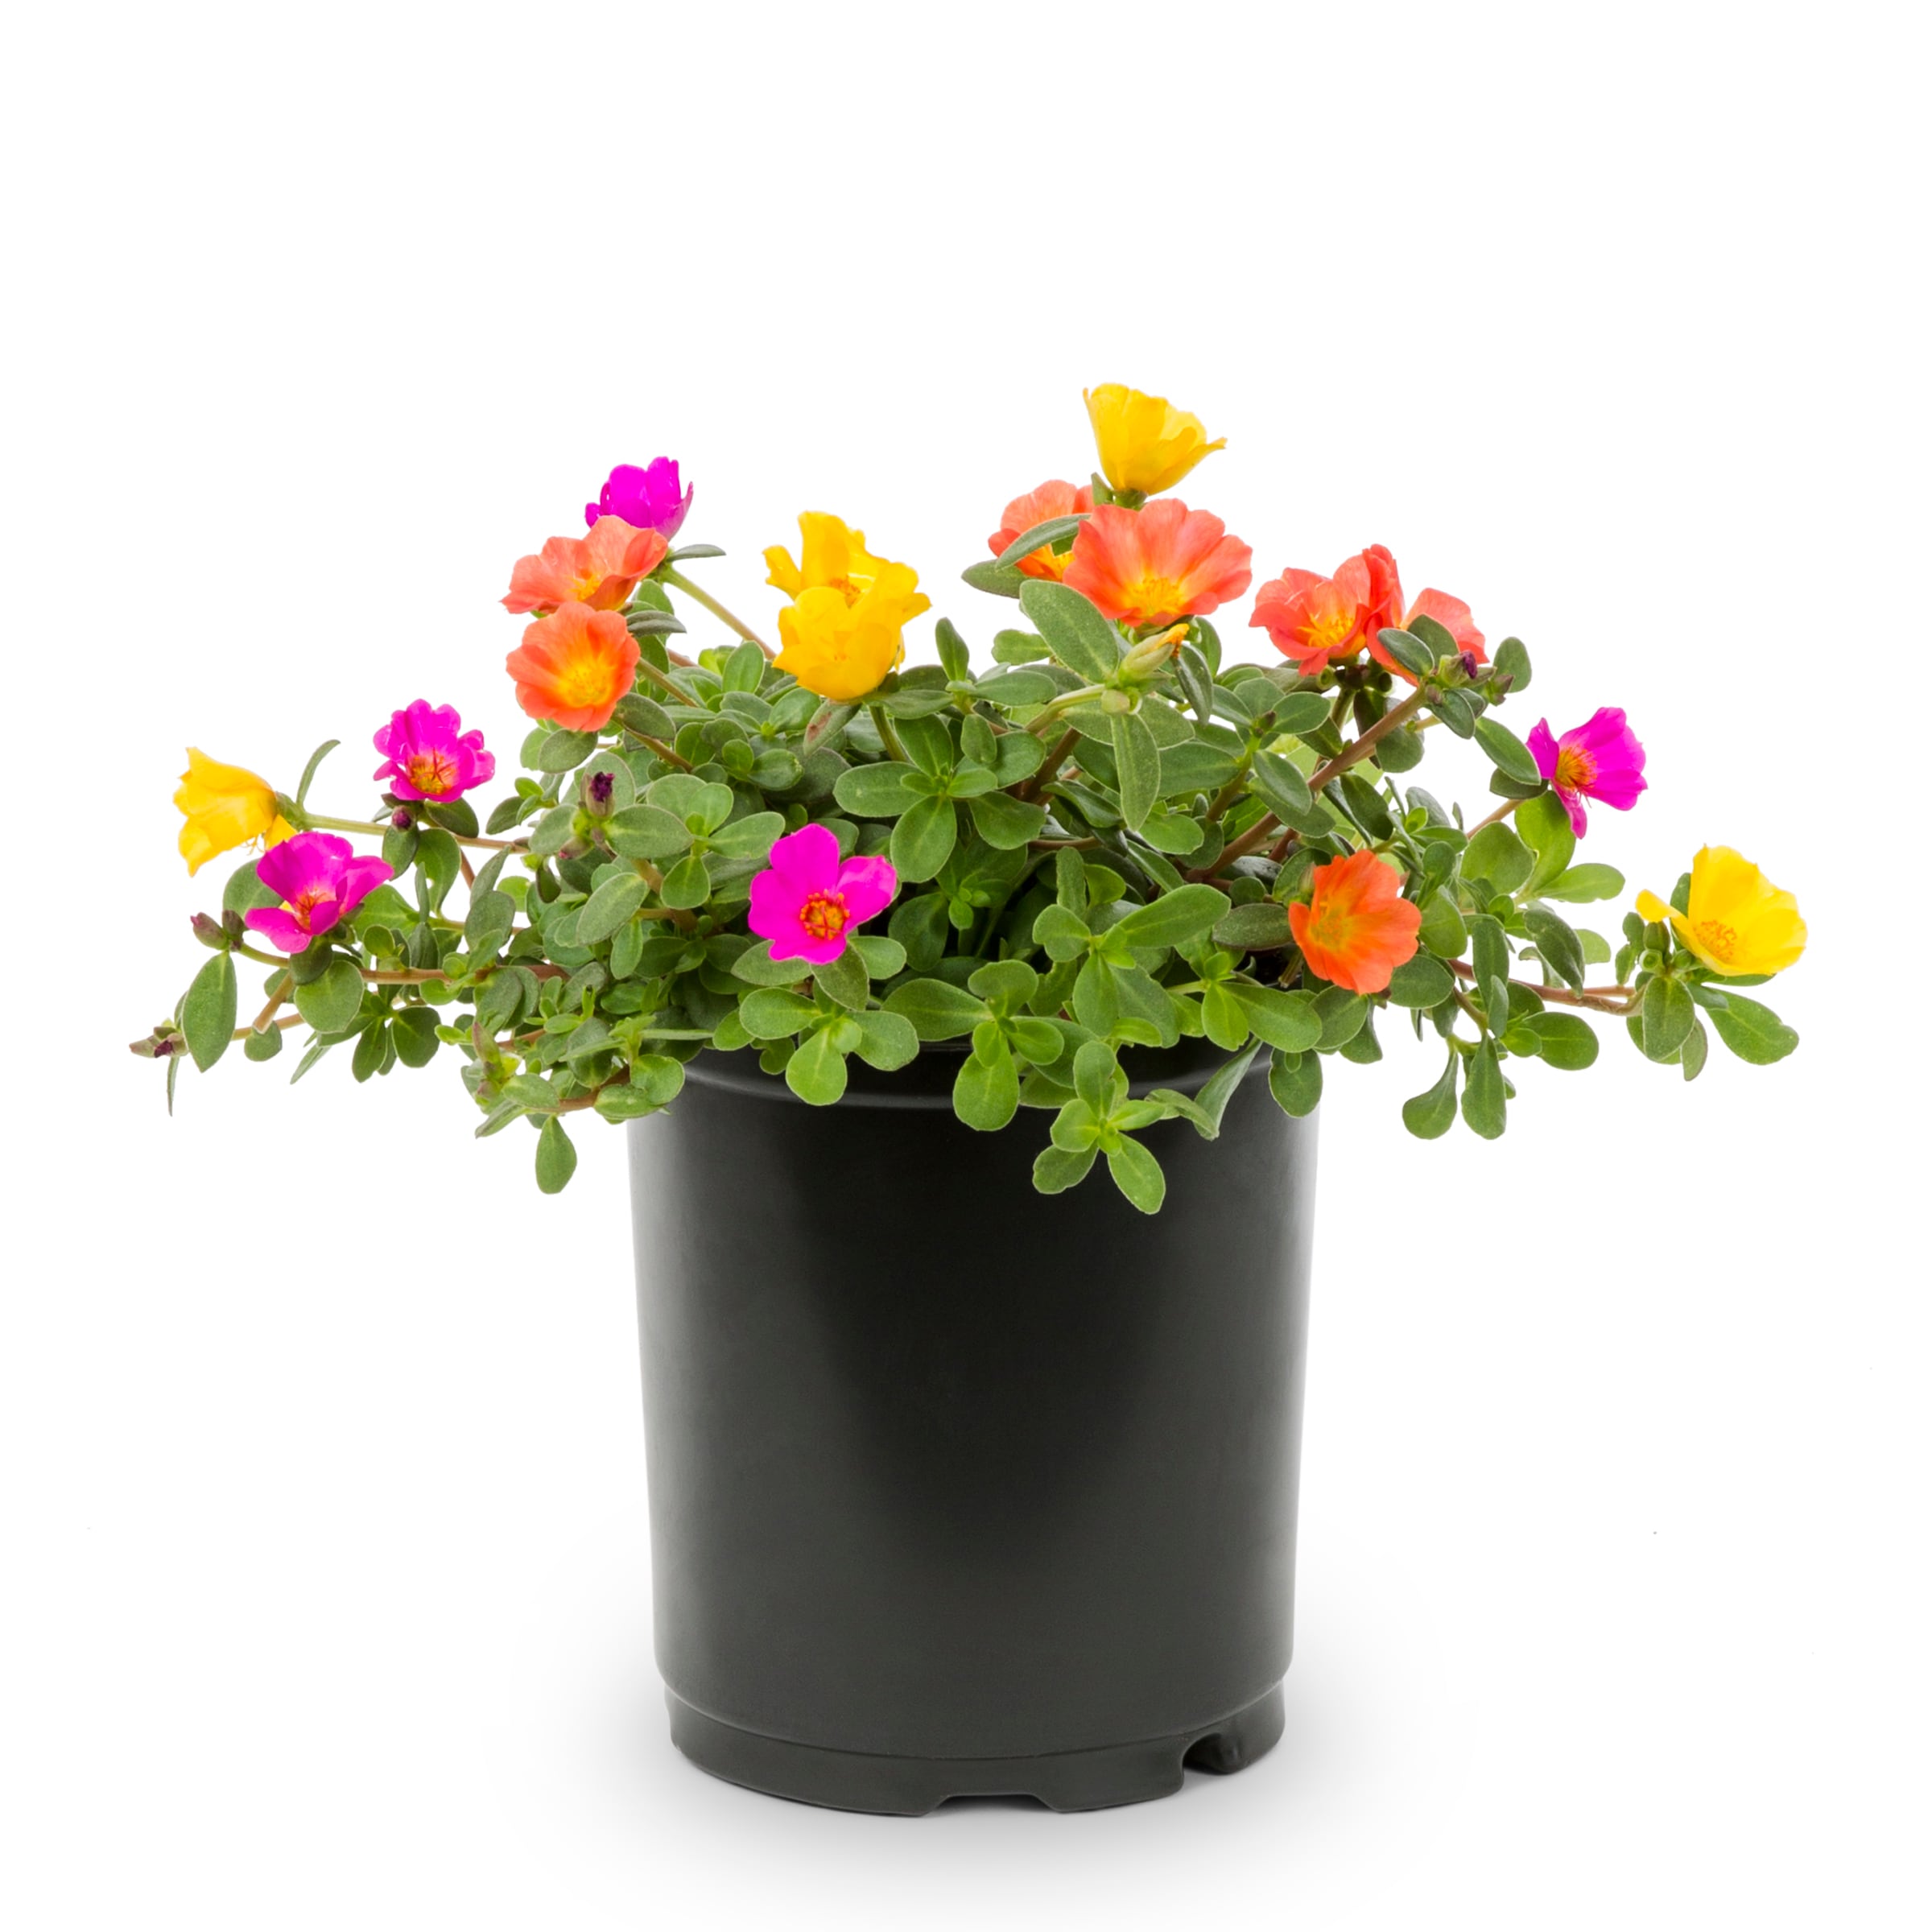 How To Keep Portulaca Blooming! The Secrets To Growing Portulaca